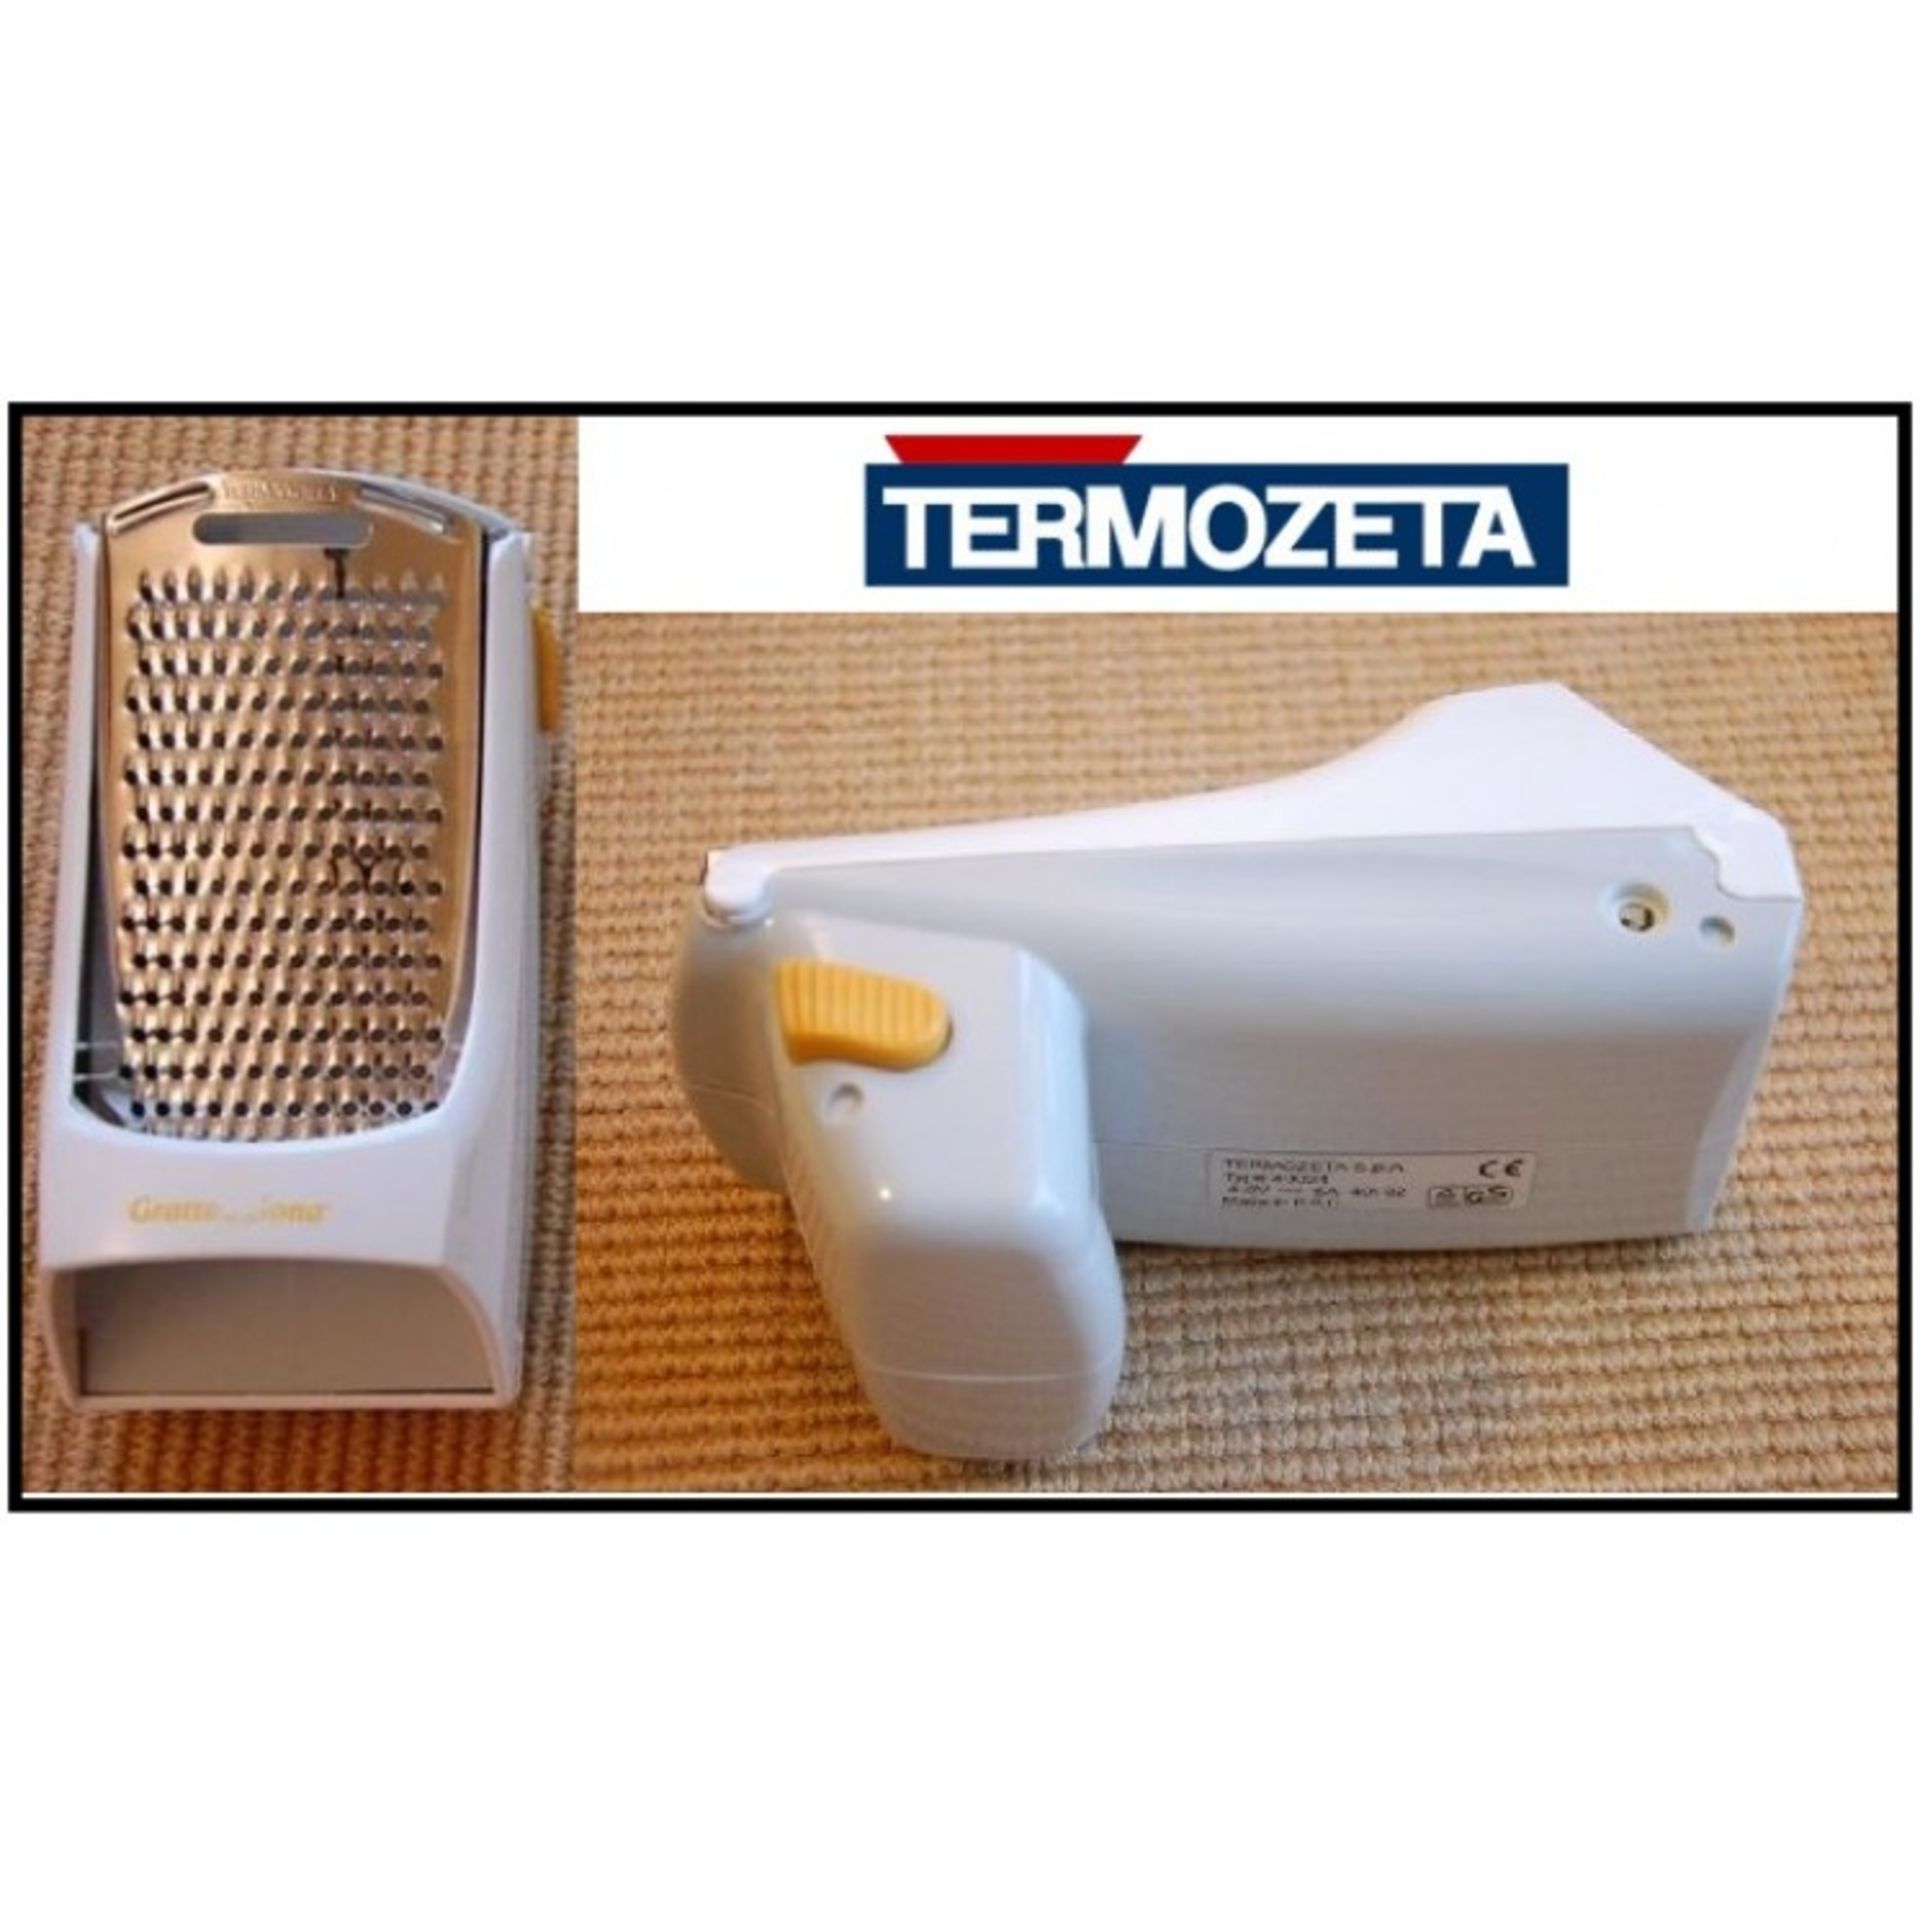 V Grade A Termozeta Rechargeable Cheese Grater-Stainless Steel Blade-Easy Clean-Size 18.5 X 8.5 X - Image 2 of 4